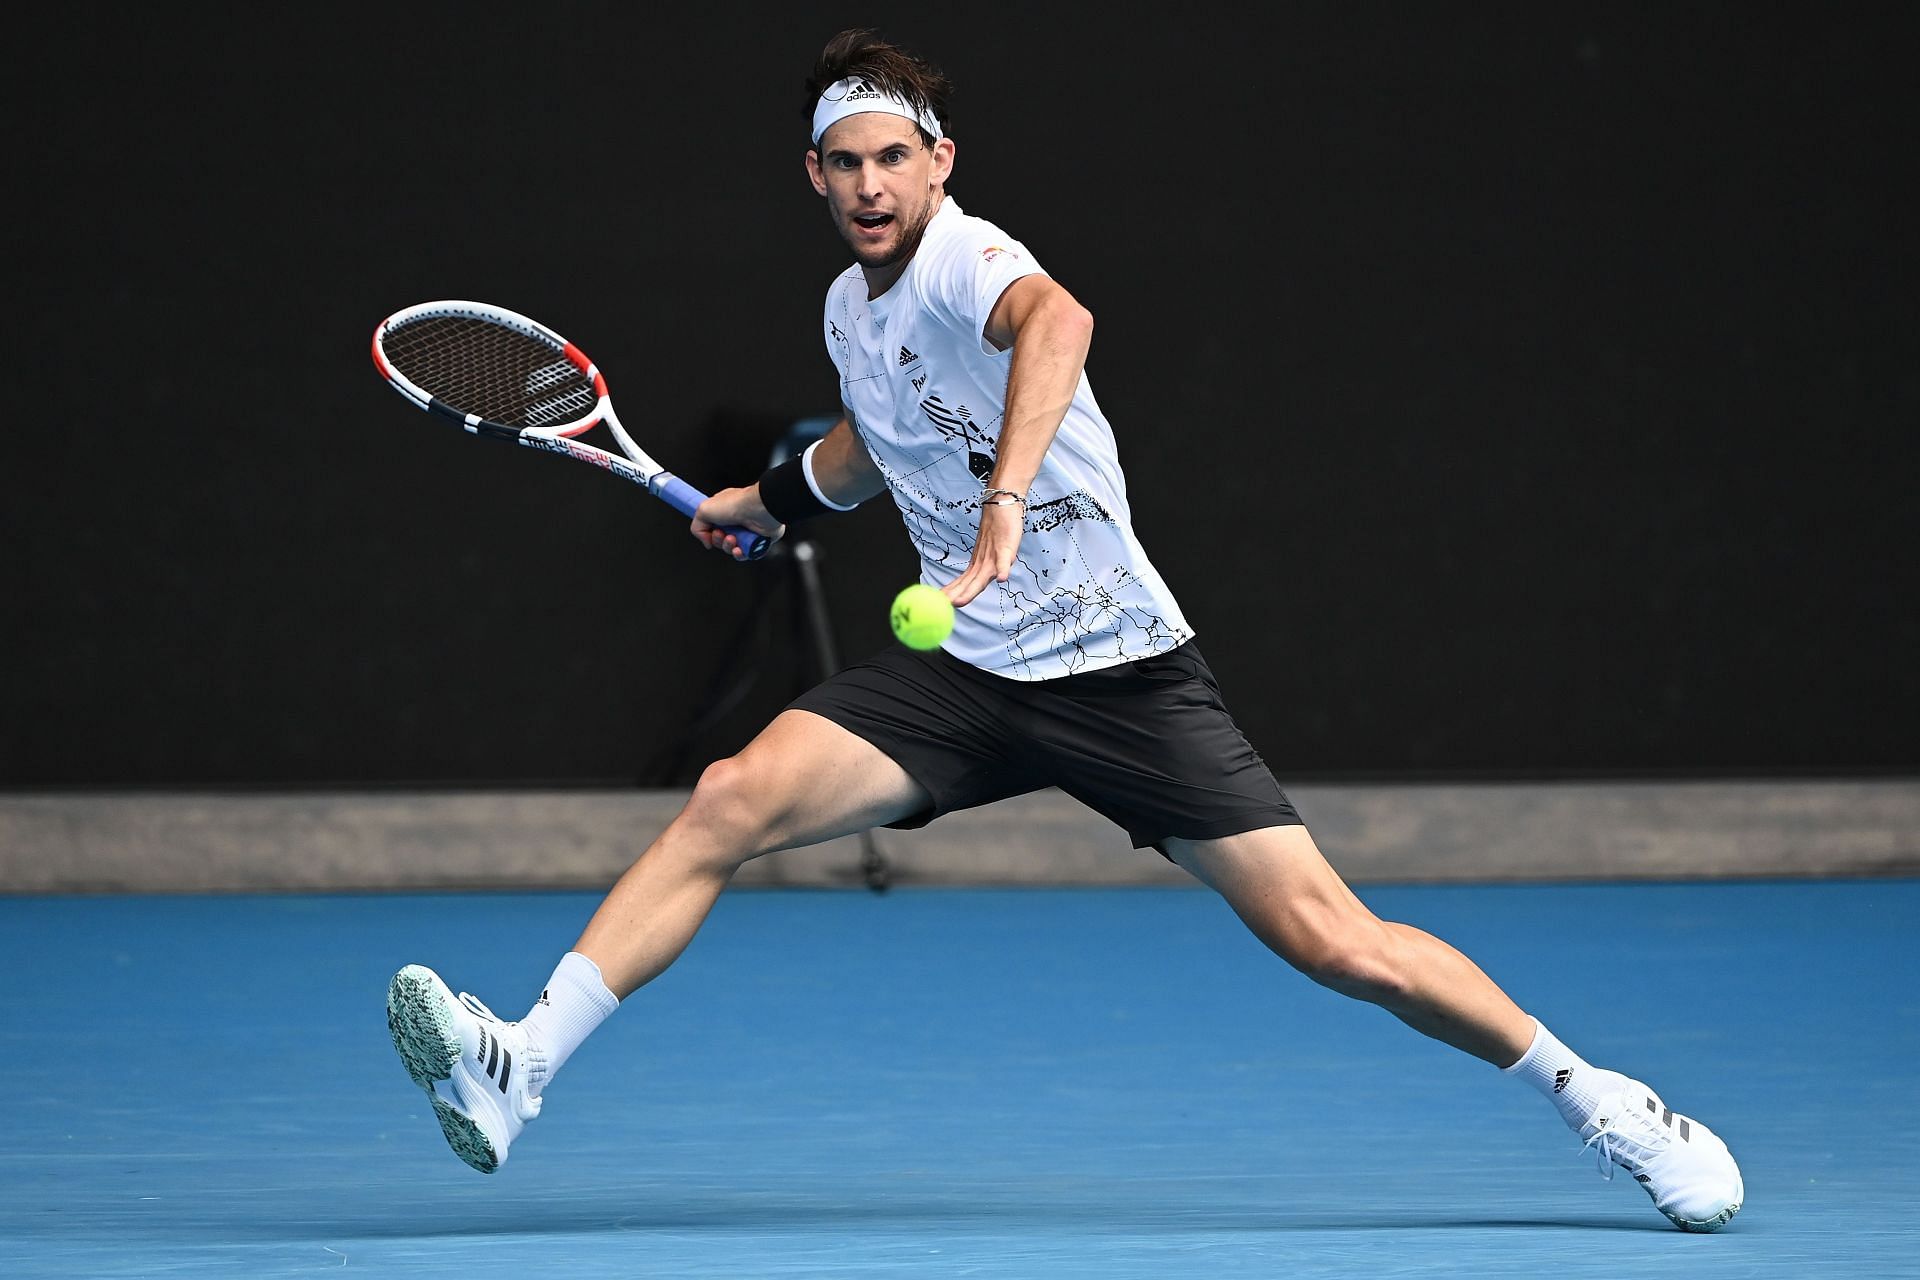 Dominic Thiem at the 2021 Australian Open: Day 1 